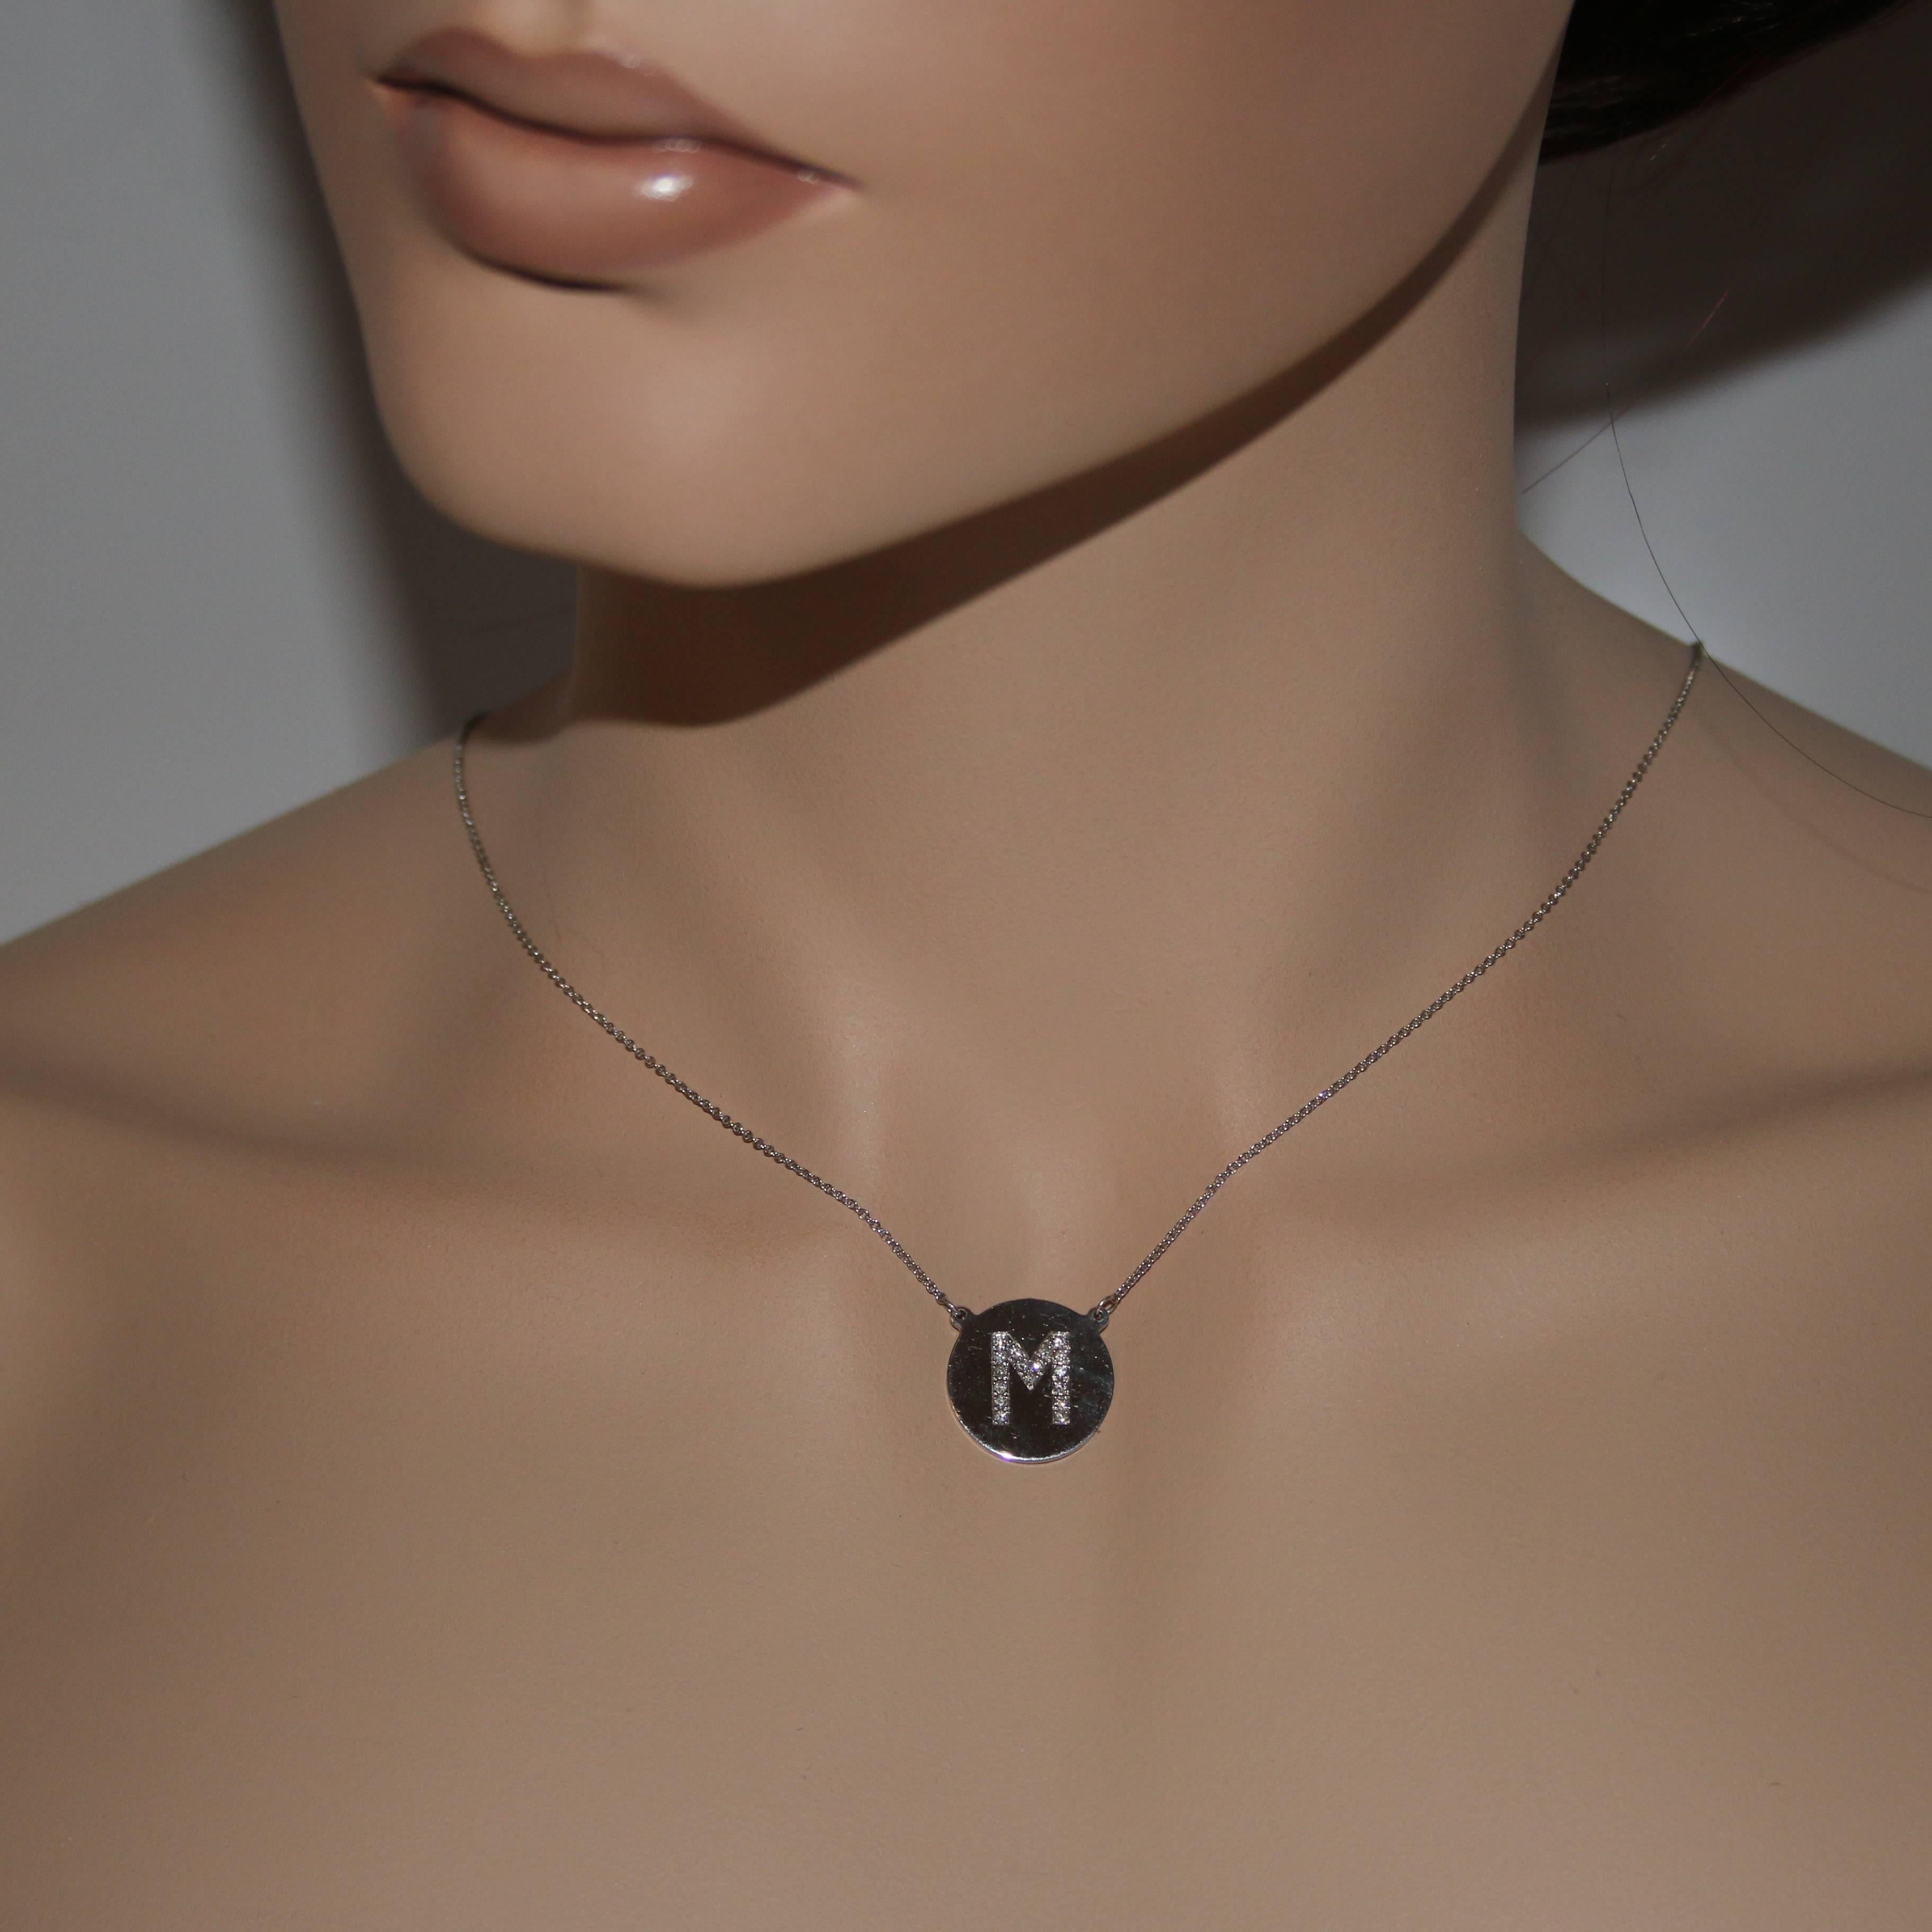 Beautiful Initial Necklace
The necklace is 14K White Gold
There are 0.13 Carats in Diamonds G/H SI
The pendant is 5/8